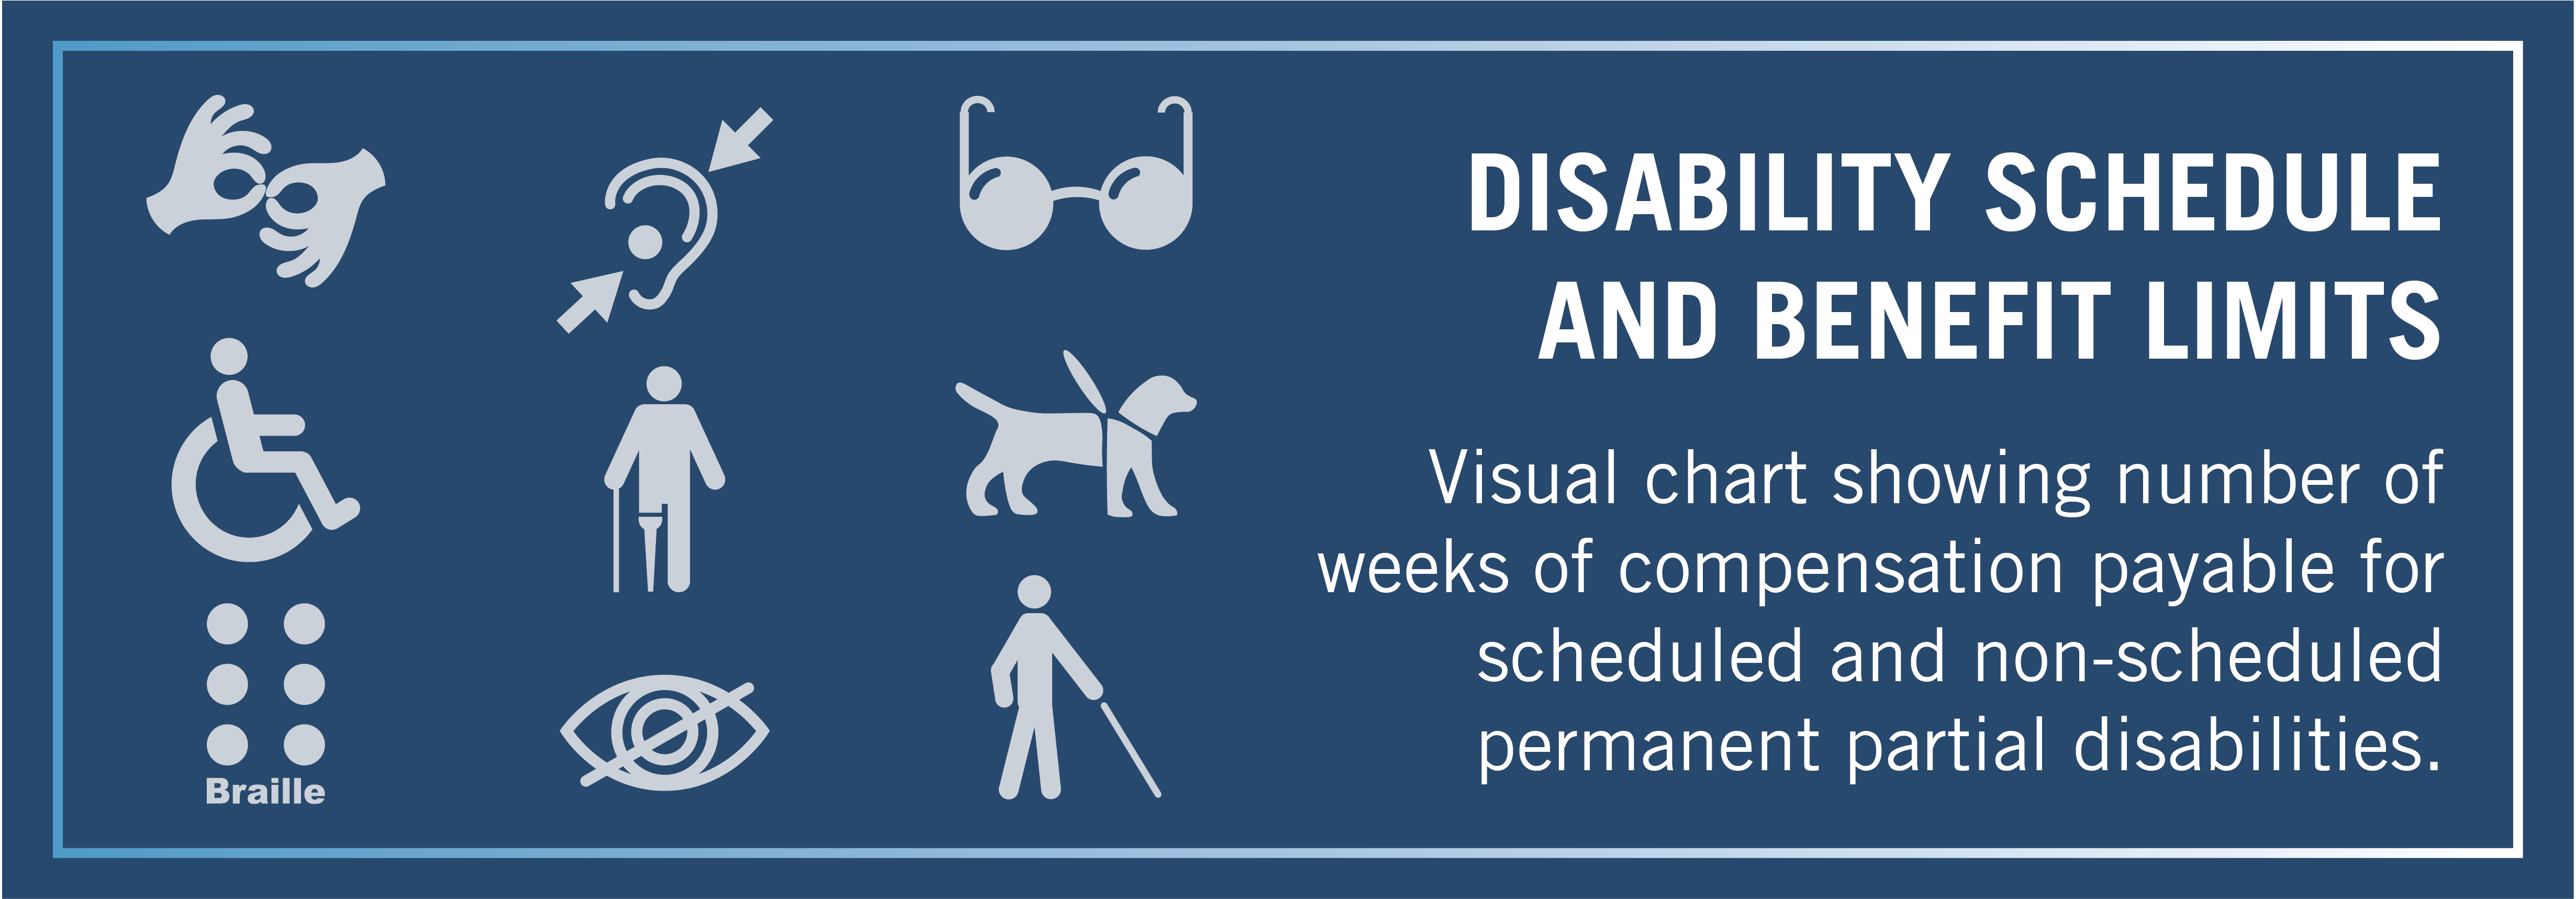 Disability Schedule and Benefit Limits